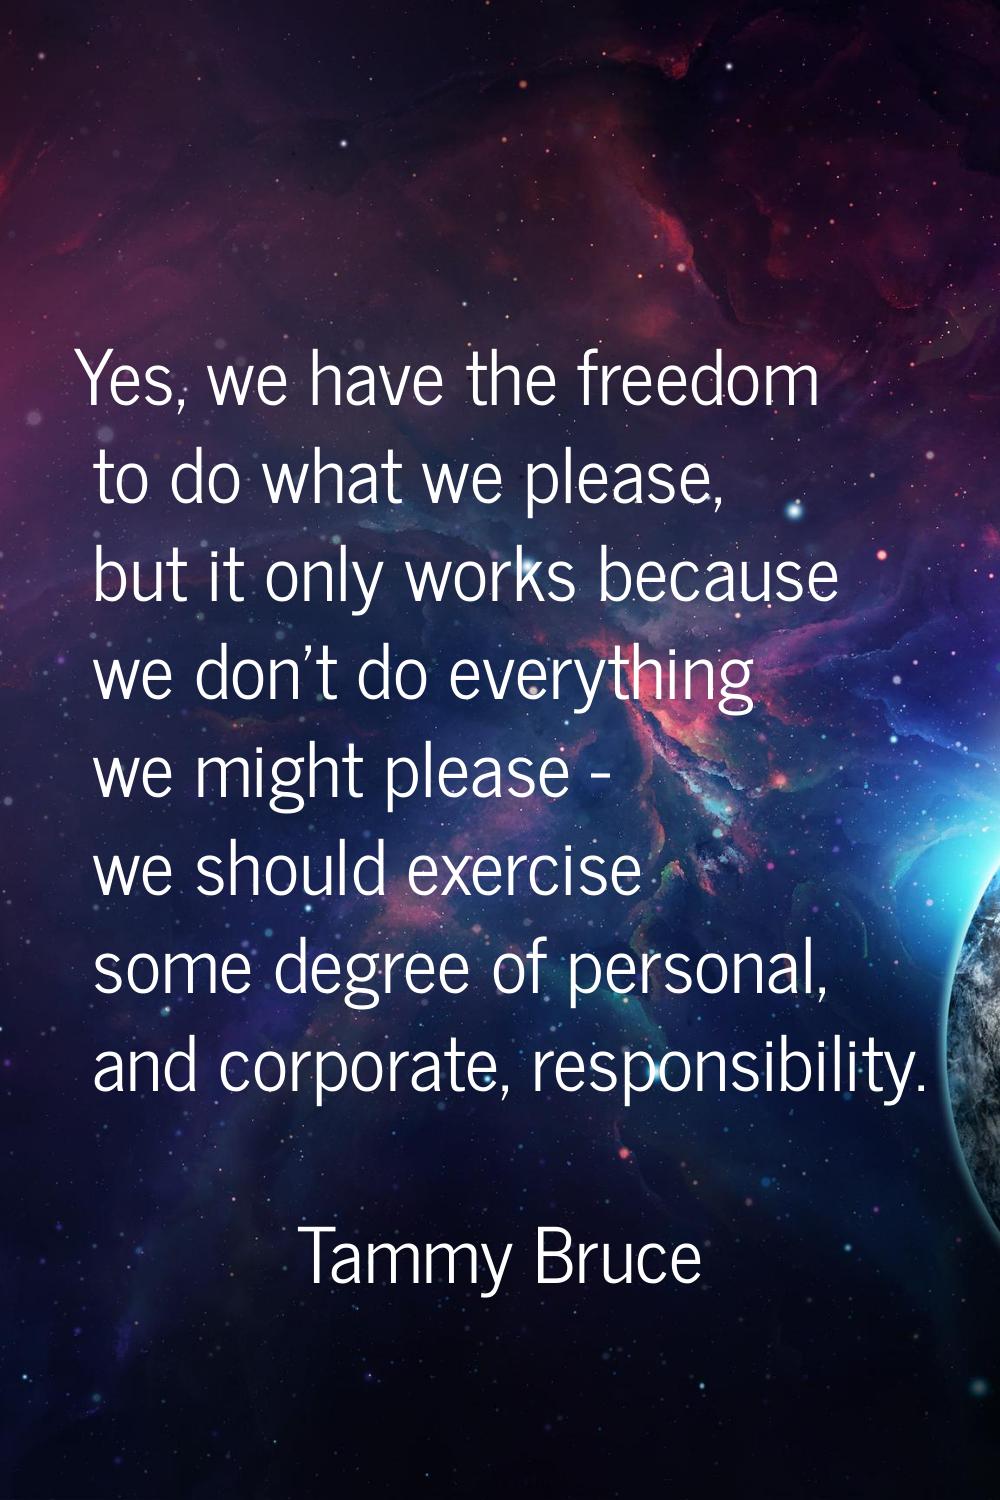 Yes, we have the freedom to do what we please, but it only works because we don't do everything we 